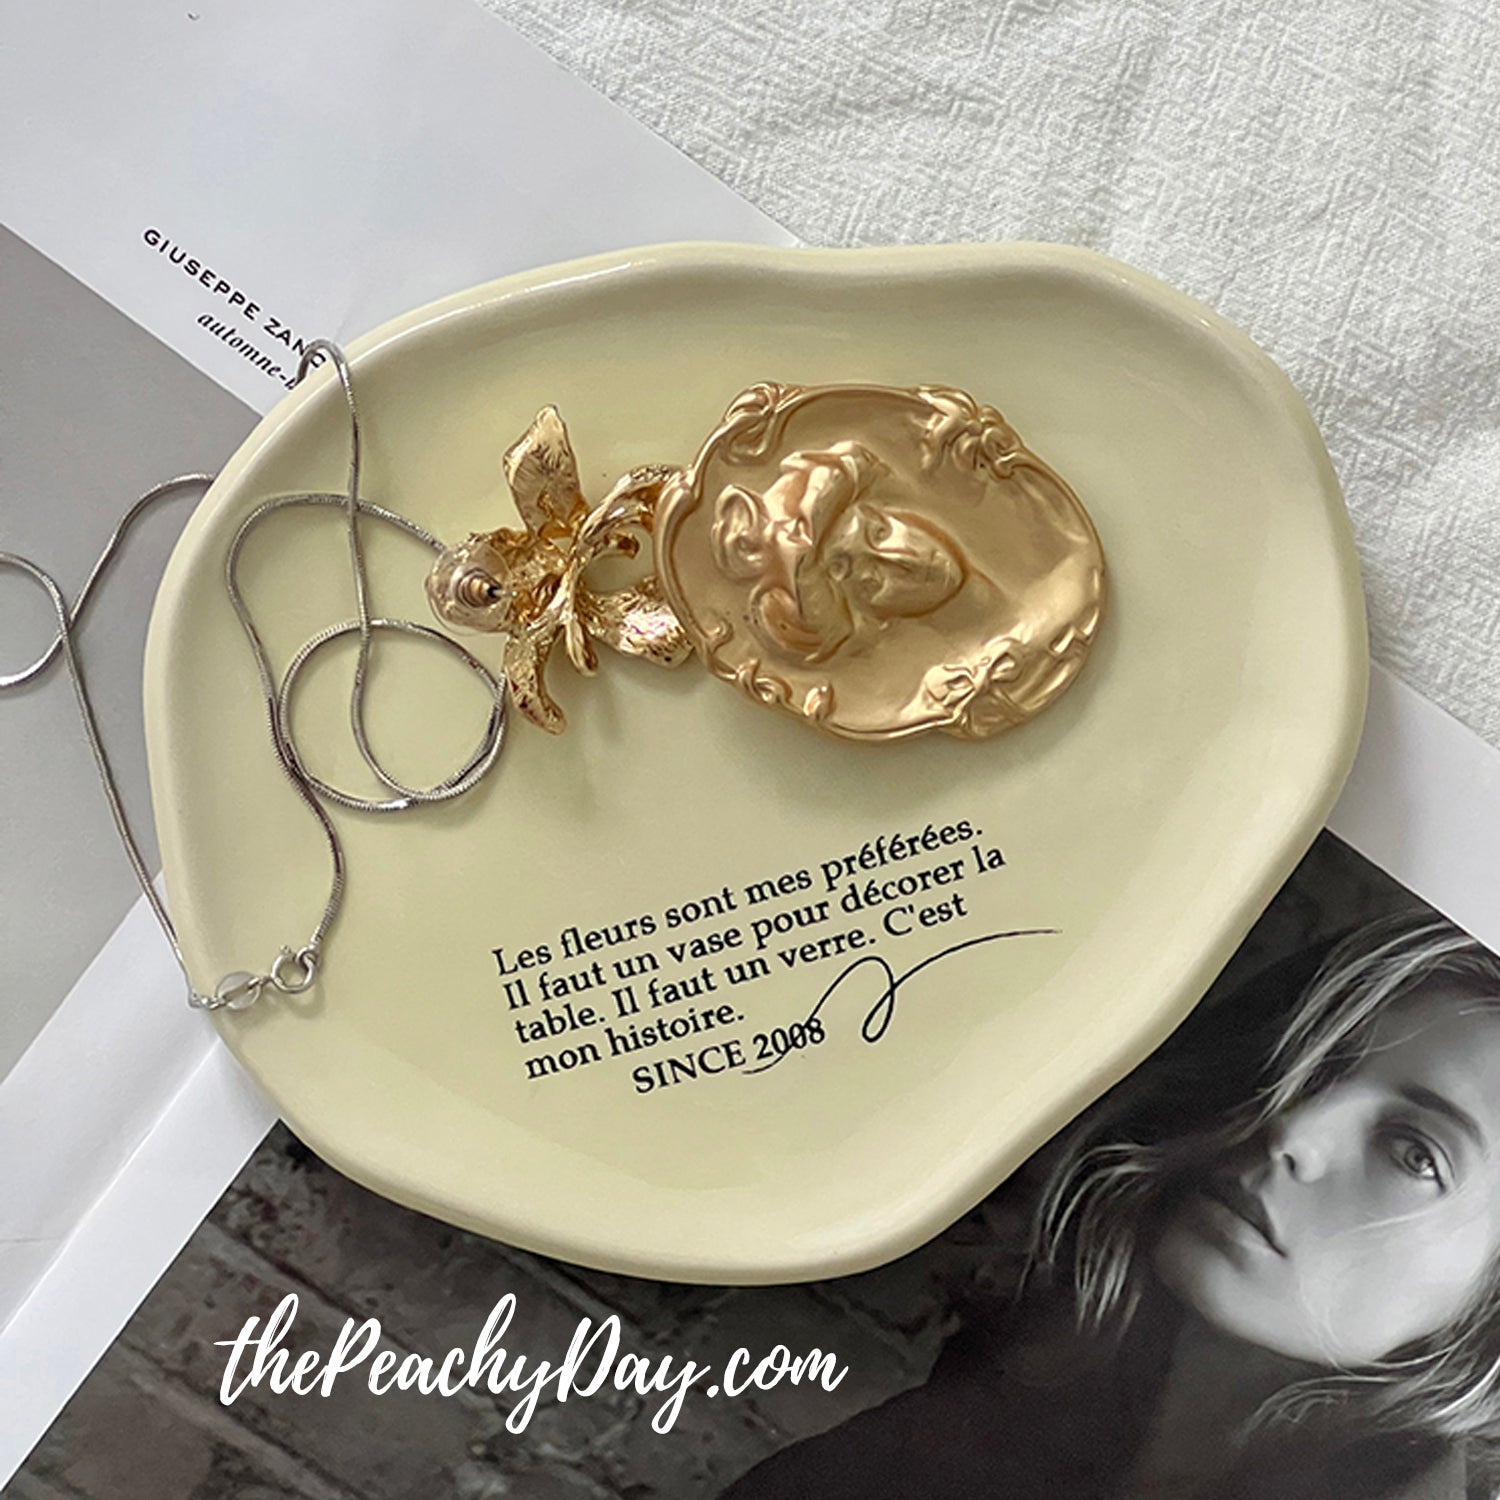 Ceramic Jewelry Tray, Decorative Trinket Dish for Rings Earrings Necklaces Bracelet Watch Keys Birthday Mother's Day Christmas Gift for Women